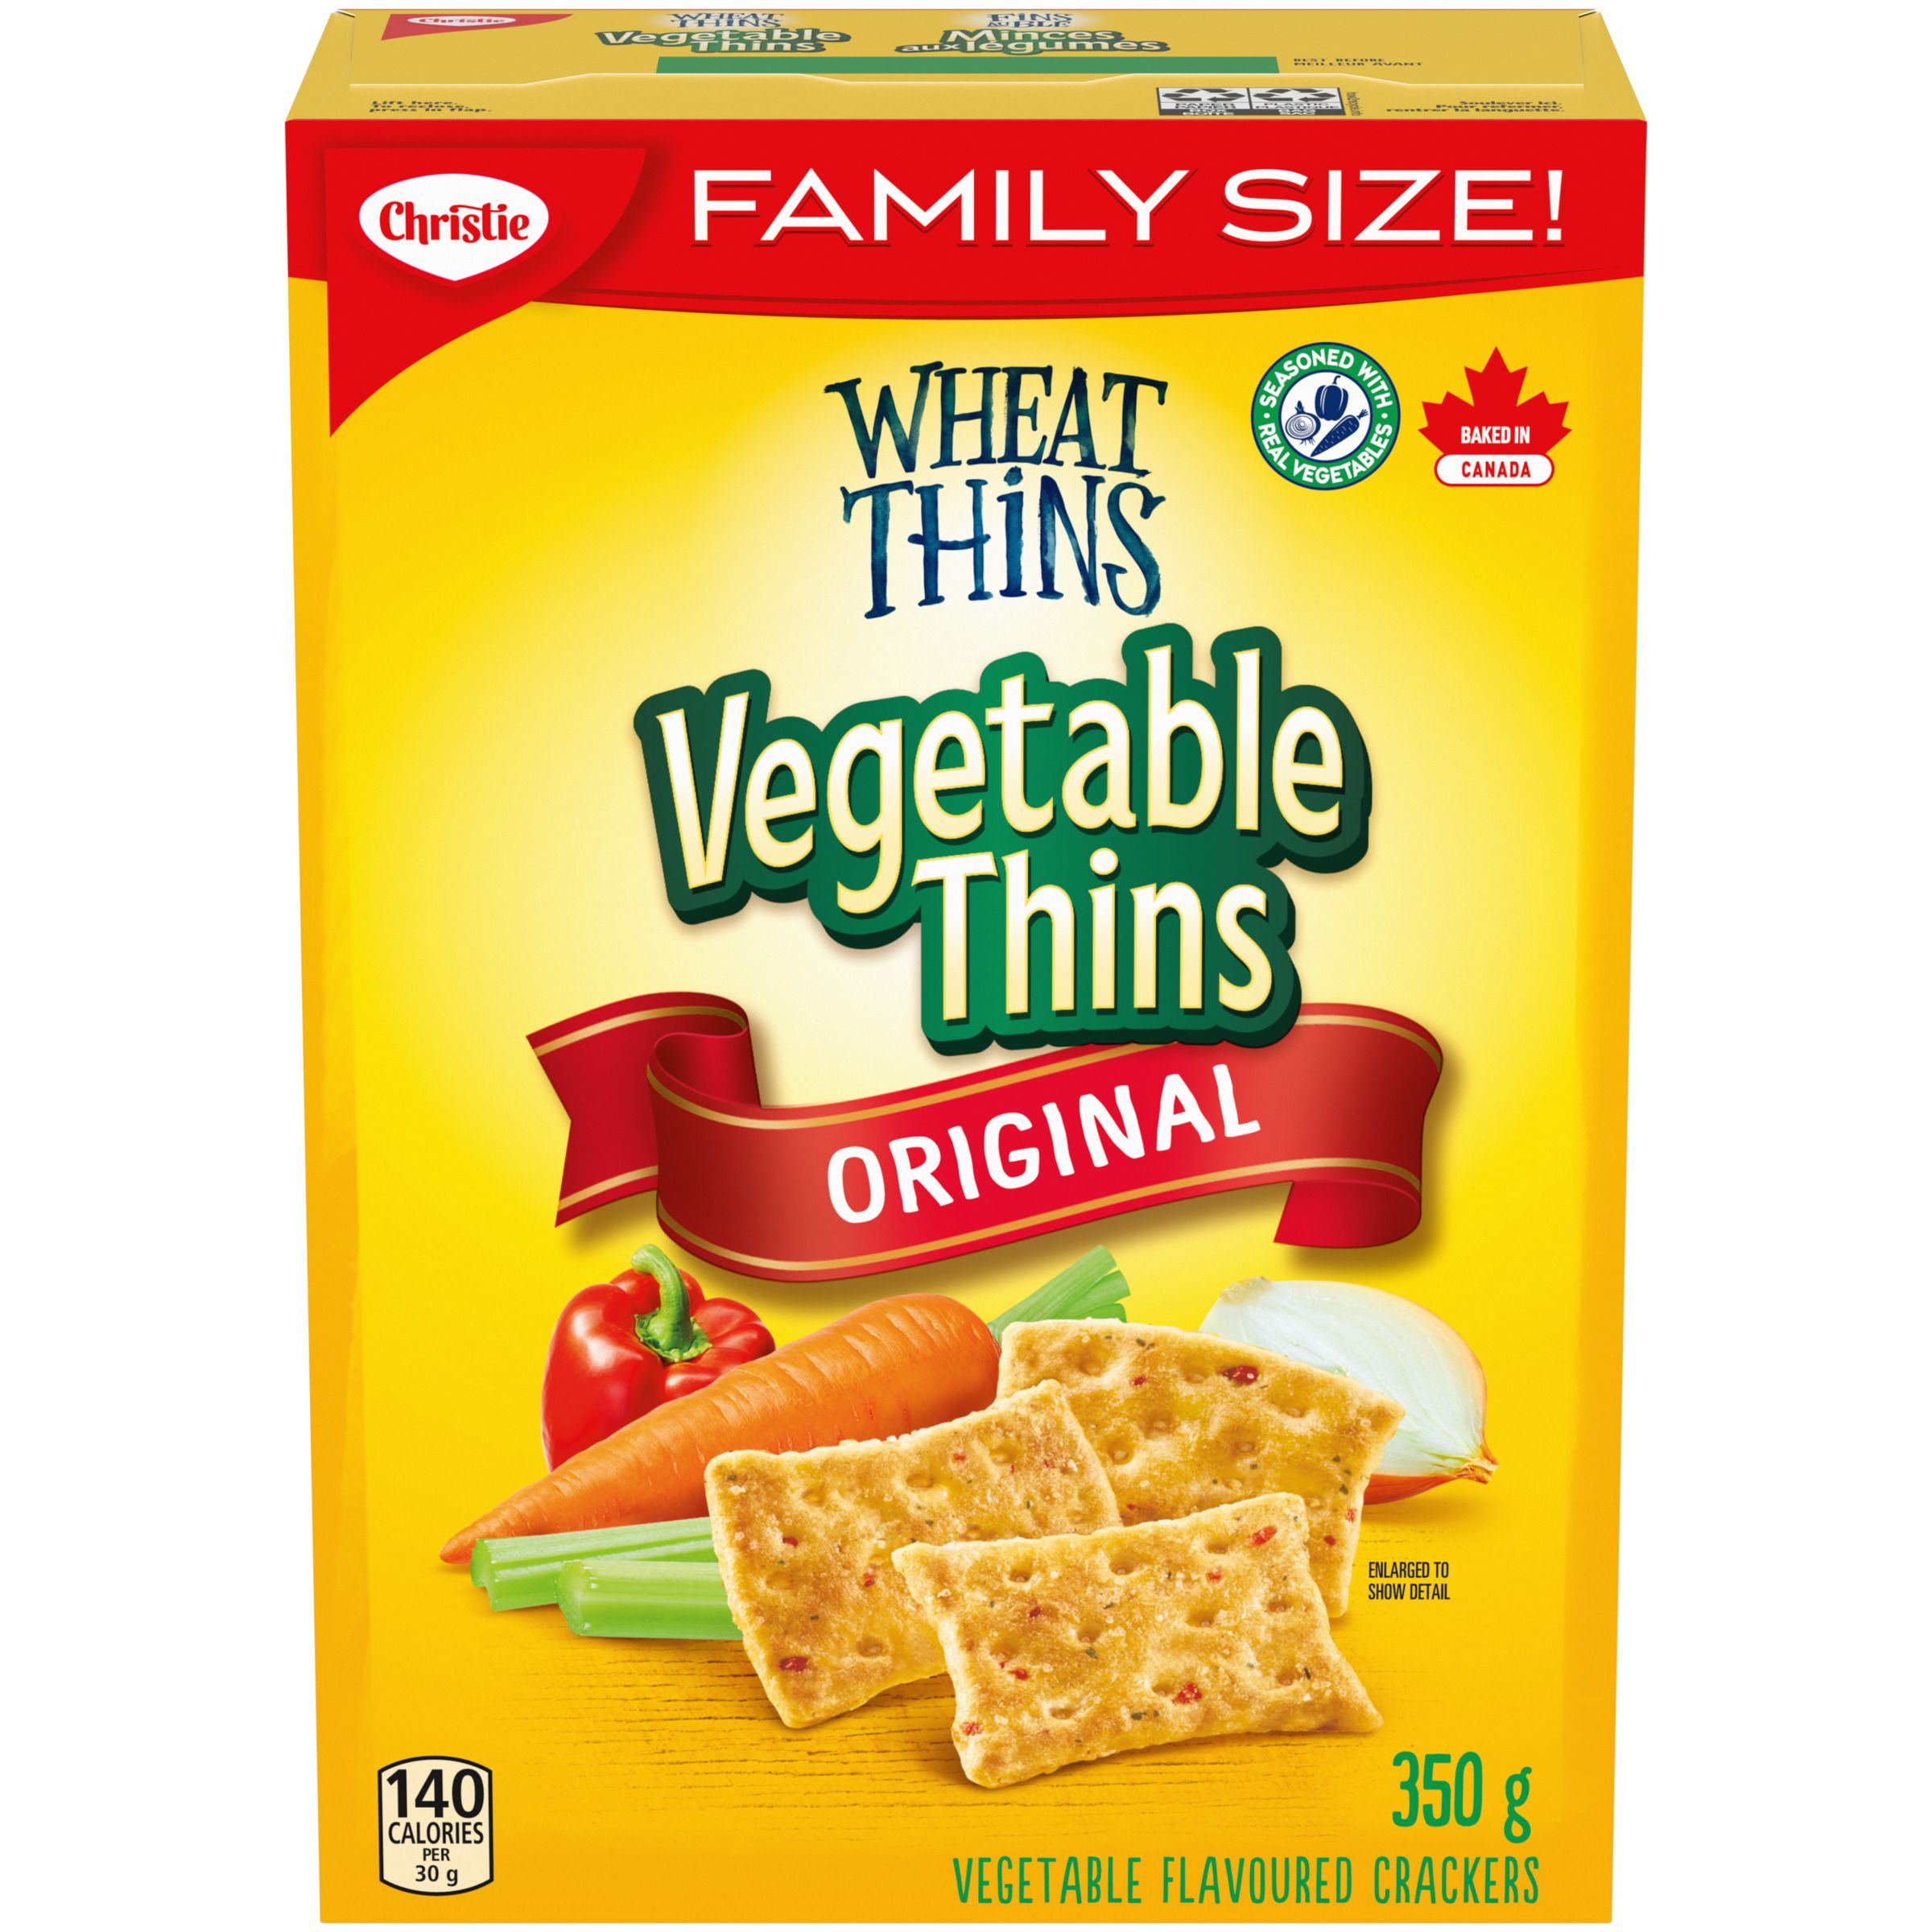 Wheat Thins Vegetable Thins Family Size Crackers 350 G-1